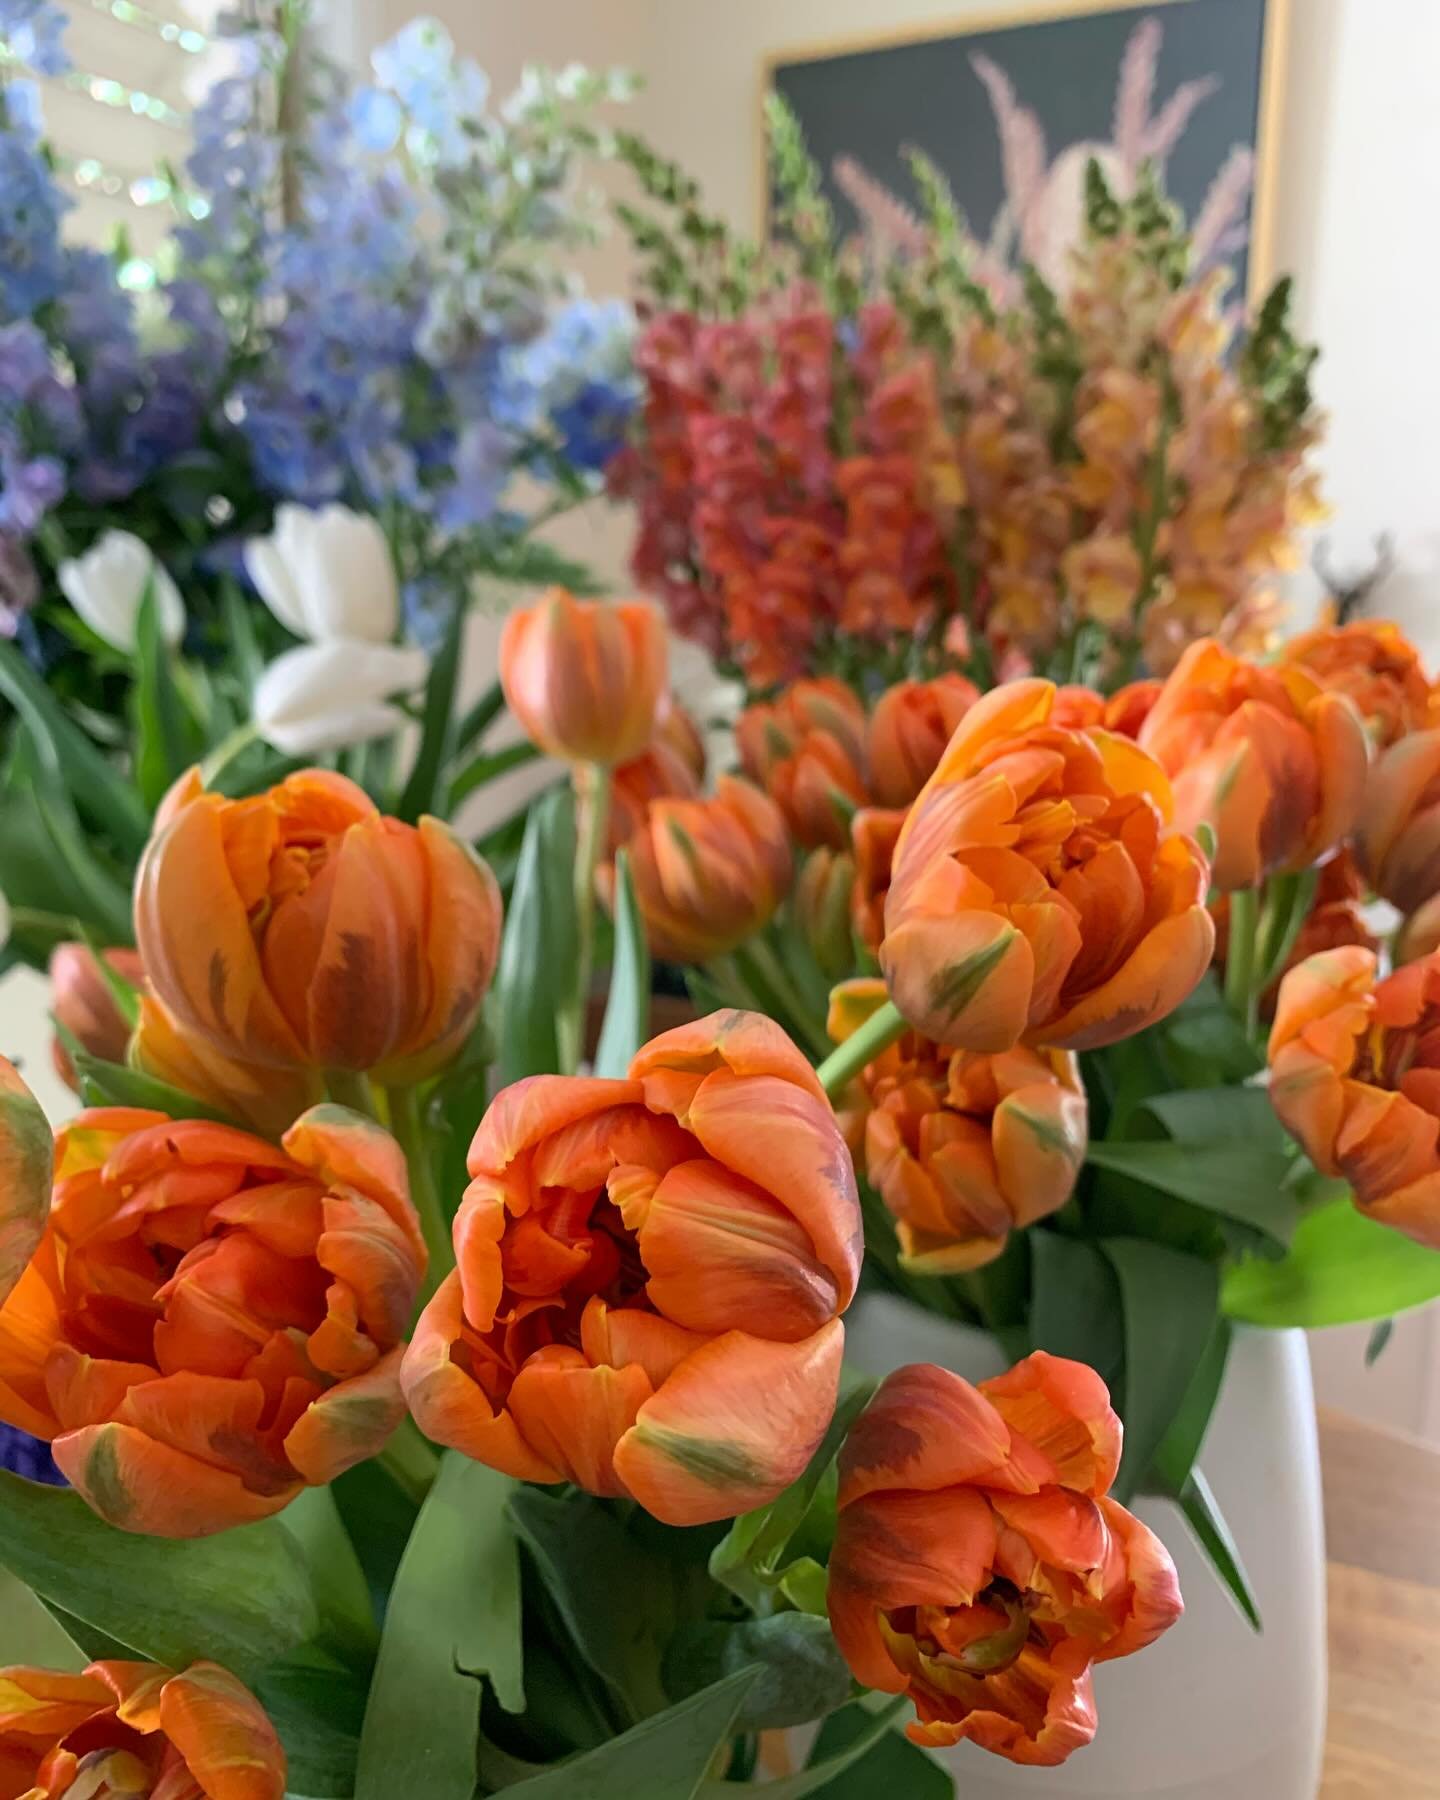 Thank you everyone who has already booked in for this workshop. Here is the booking link if you&rsquo;d like to join us: https://events.humanitix.com/hand-tied-bouquet-workshop 🧡 I spent many blissful hours creating florals for a wedding on the week